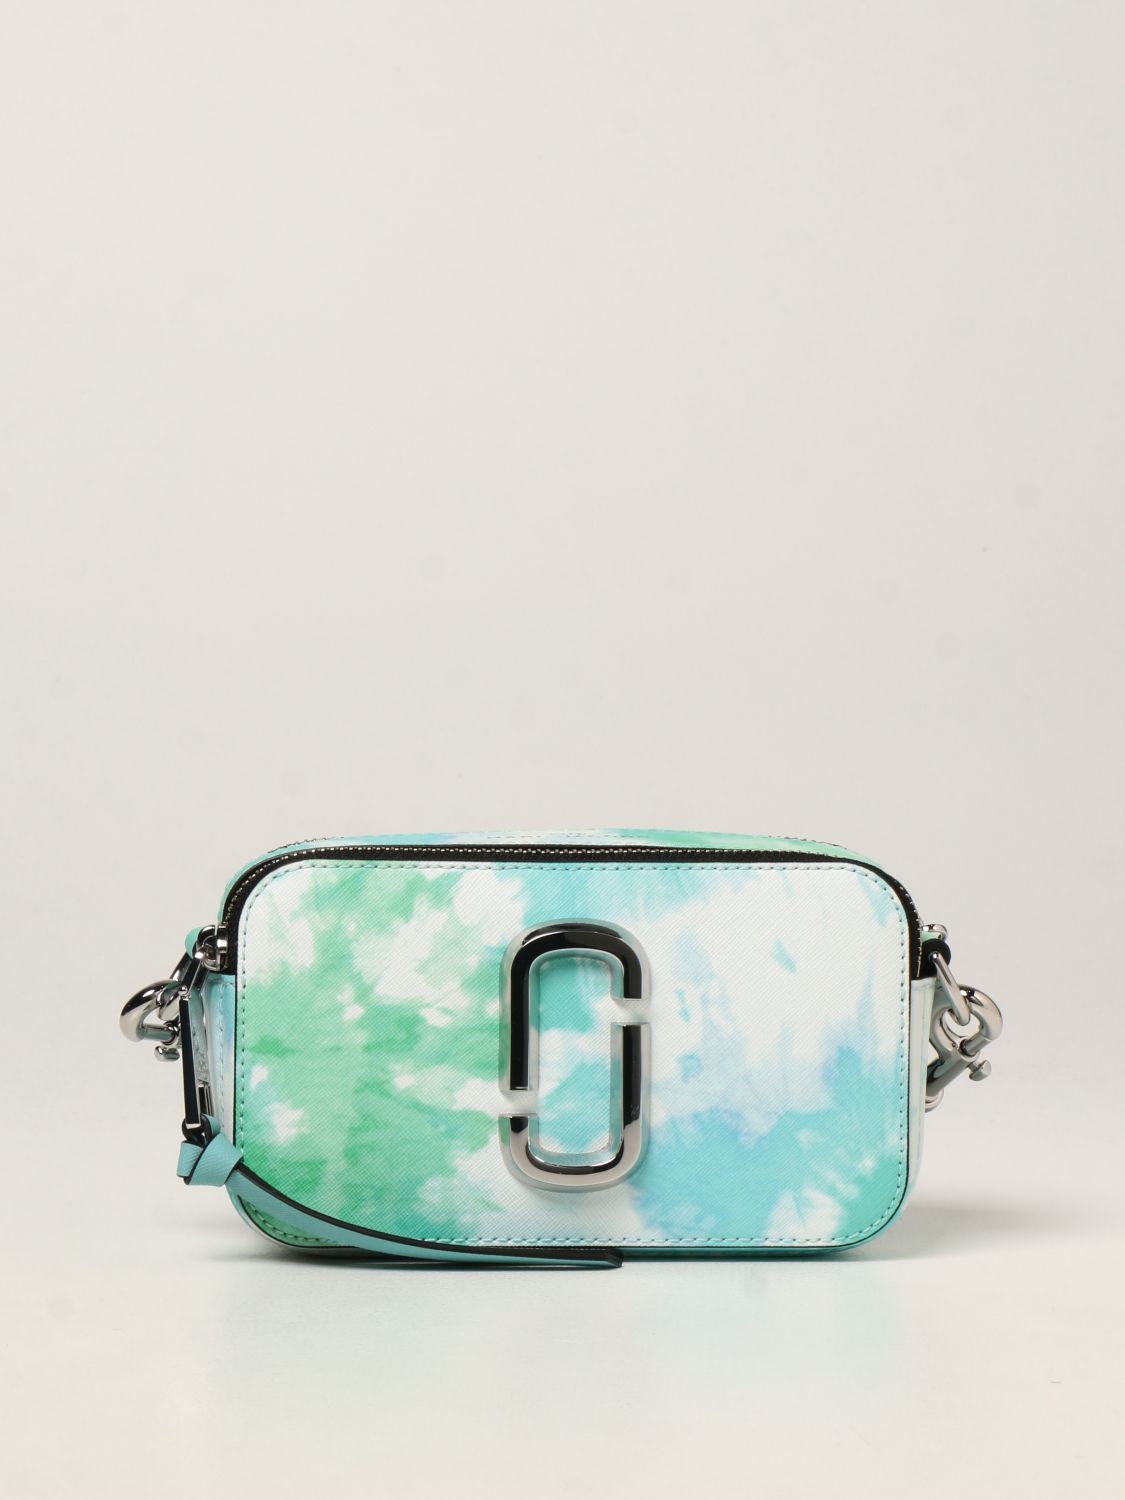 The Tie Dye Snapshot Marc Jacobs bag in saffiano leather